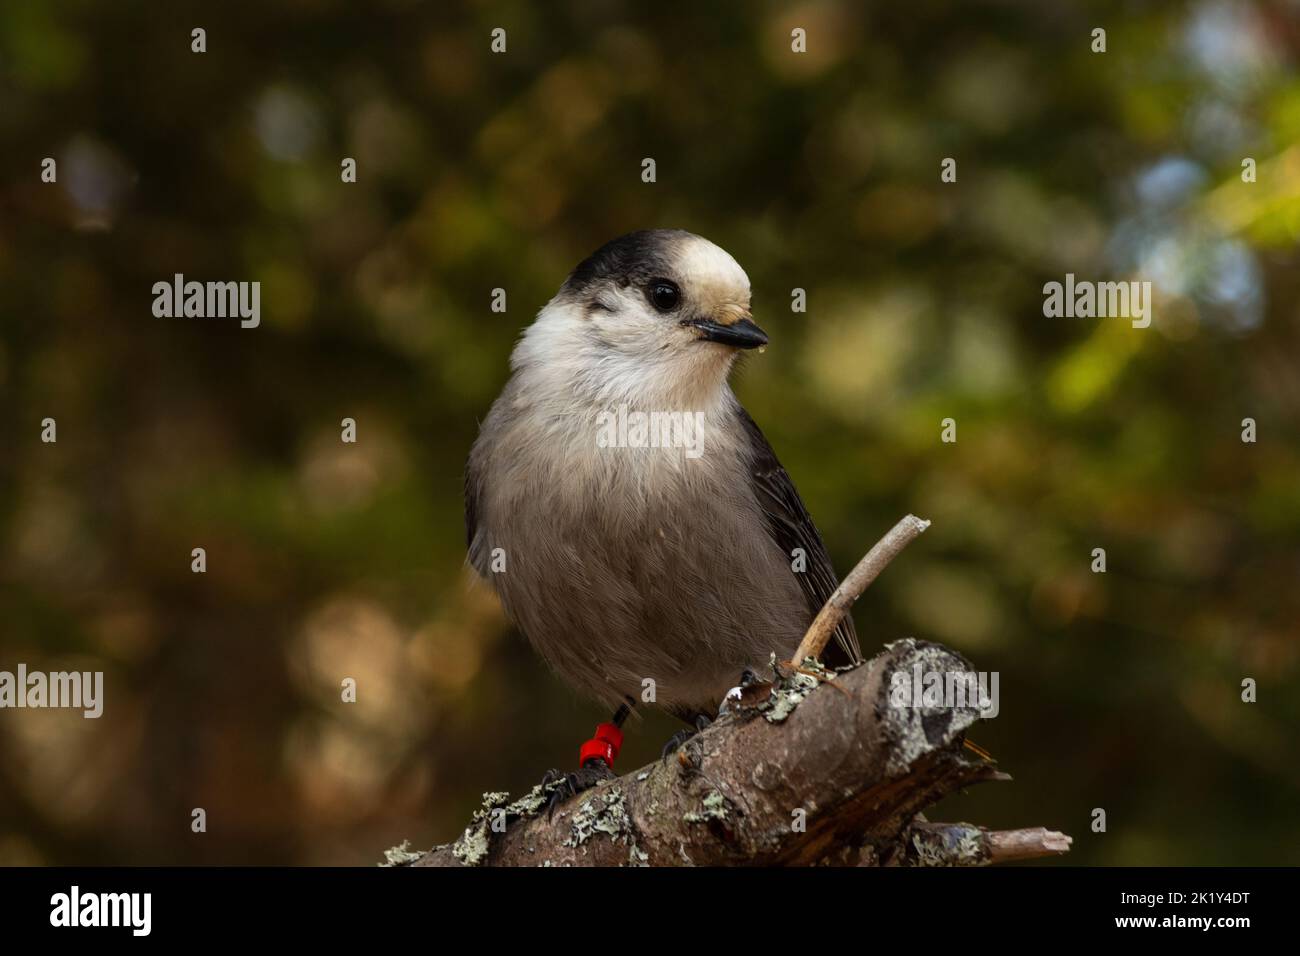 A macro shot of a gray jay in the trees; also known as a Canada jay; large protruding eyes make the bird appear adorable. Stock Photo